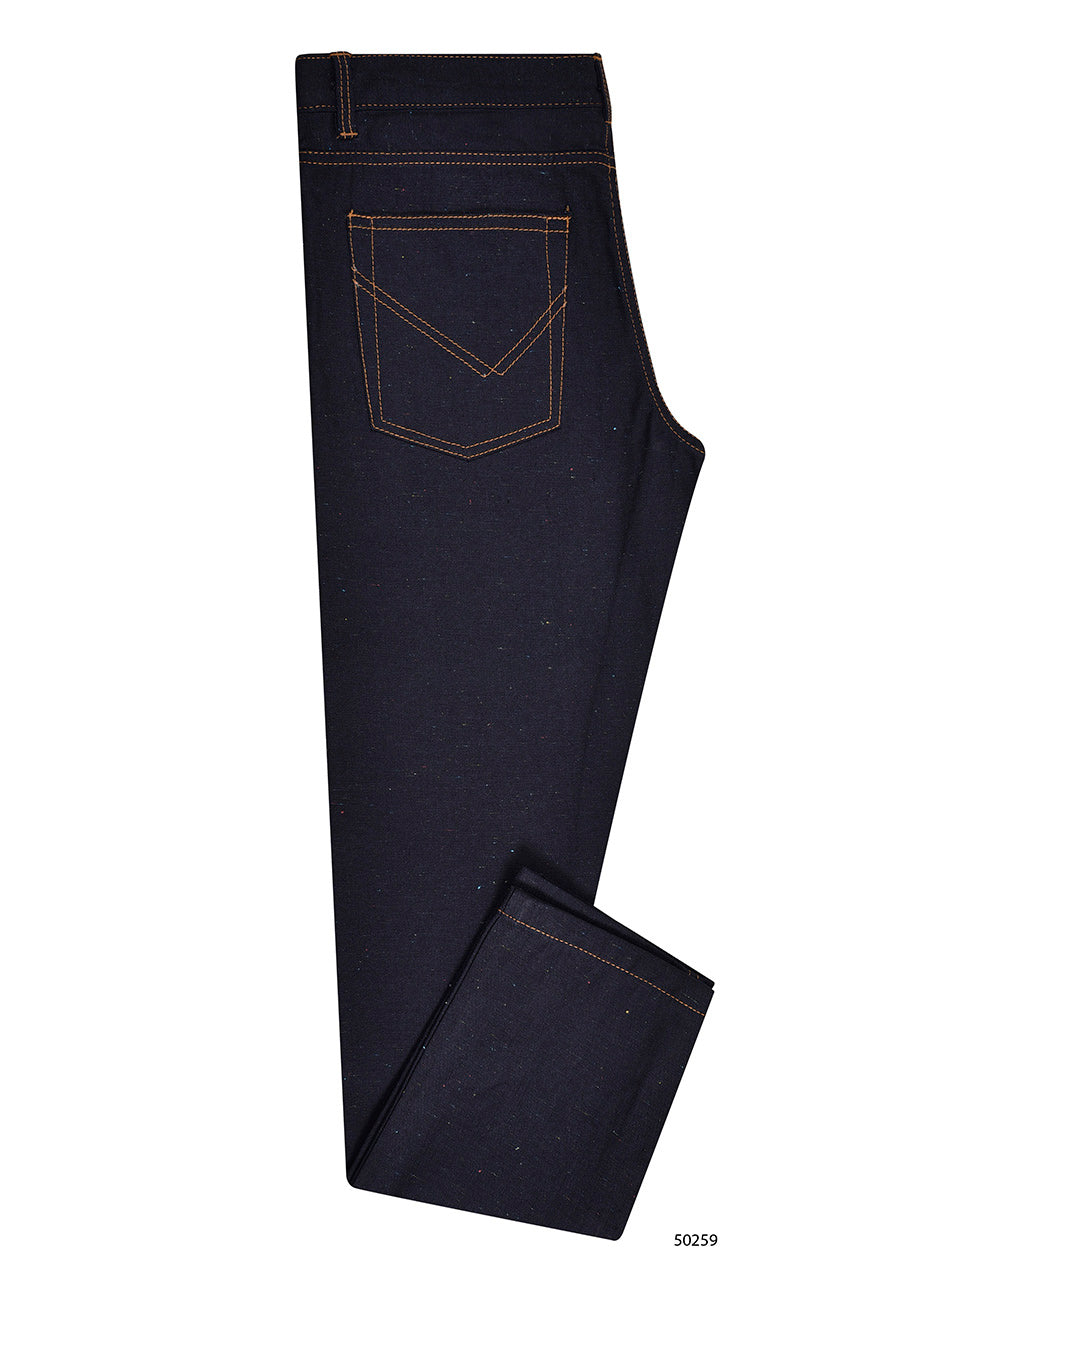 Side view of custom denim jeans for men by Luxire in speckled